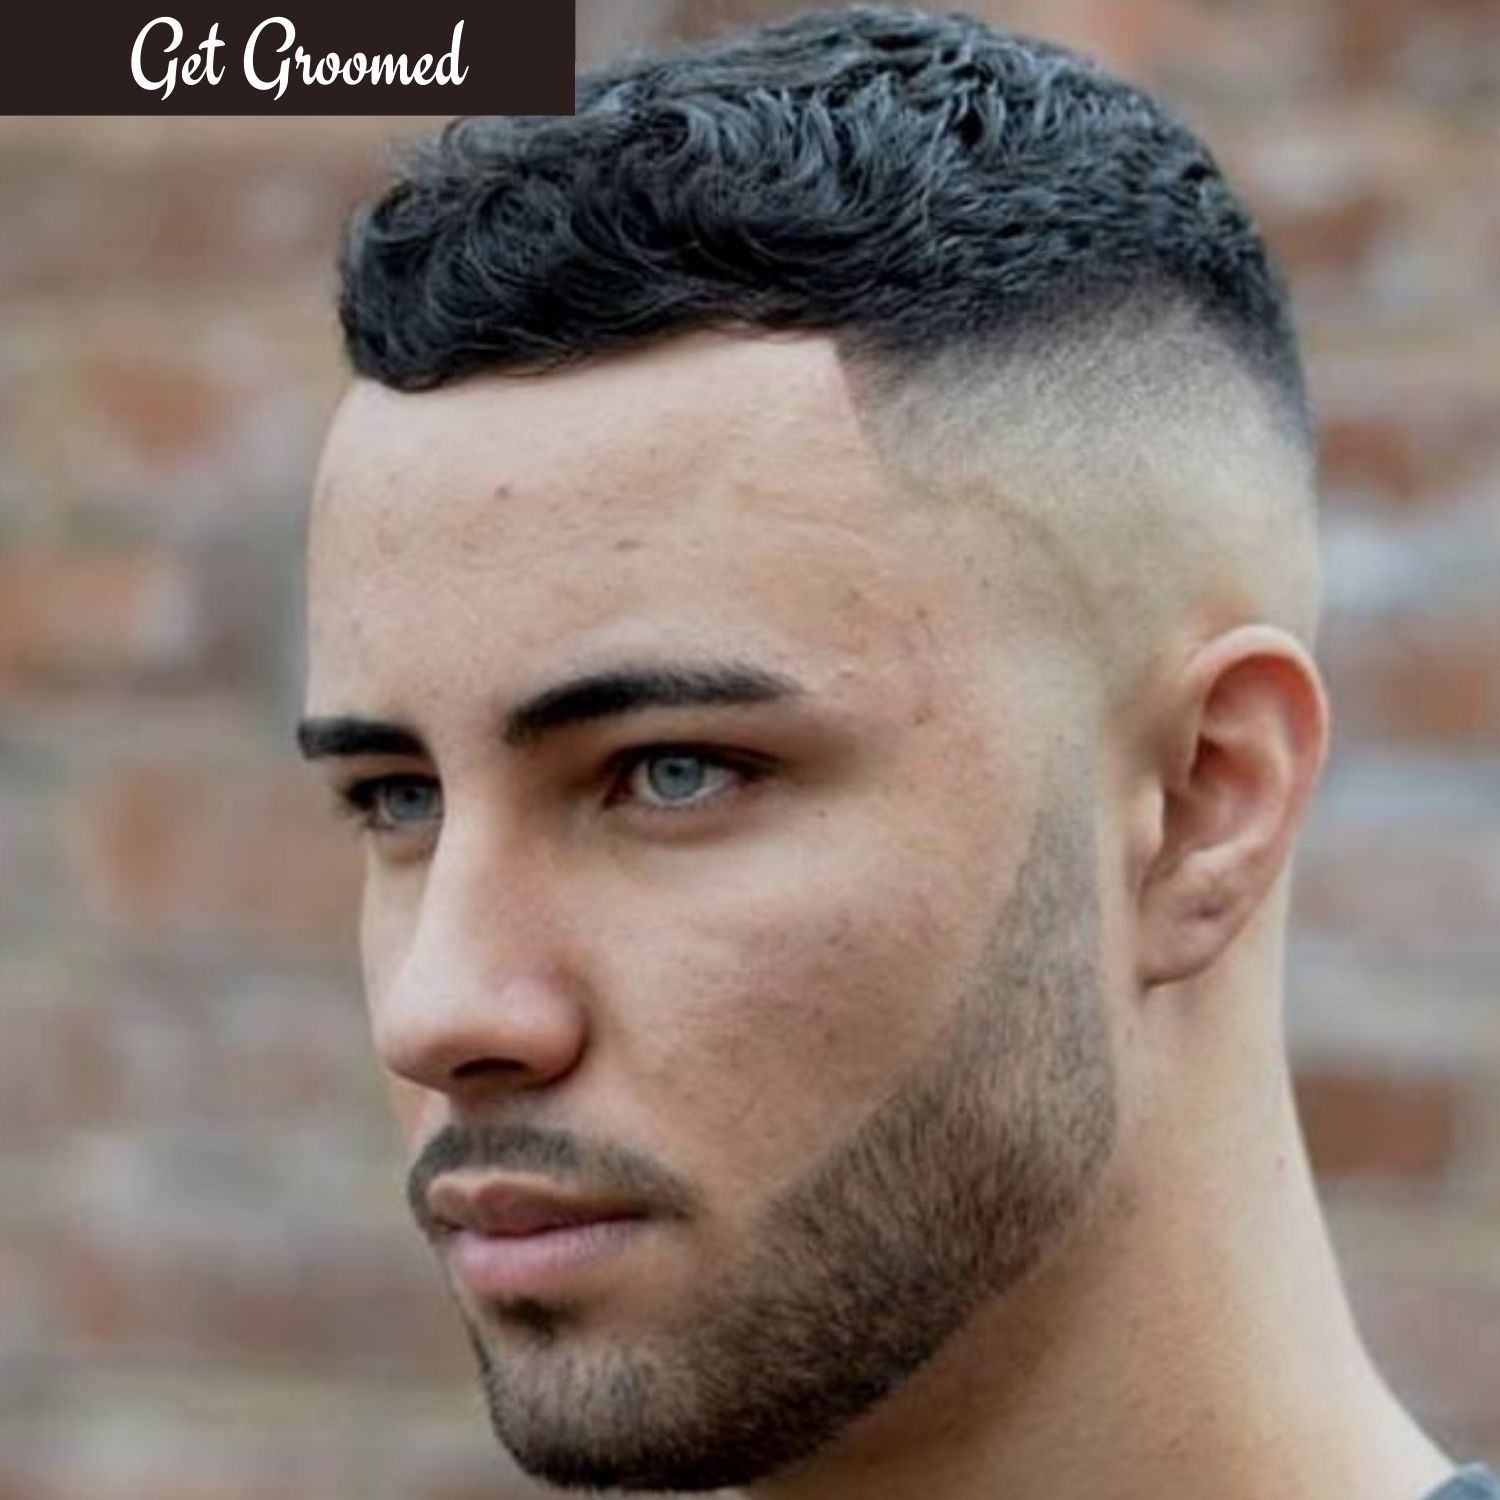 Japanese hairstyle】Popular men's hairstyles in 2022 recommended by Japanese  hair stylists